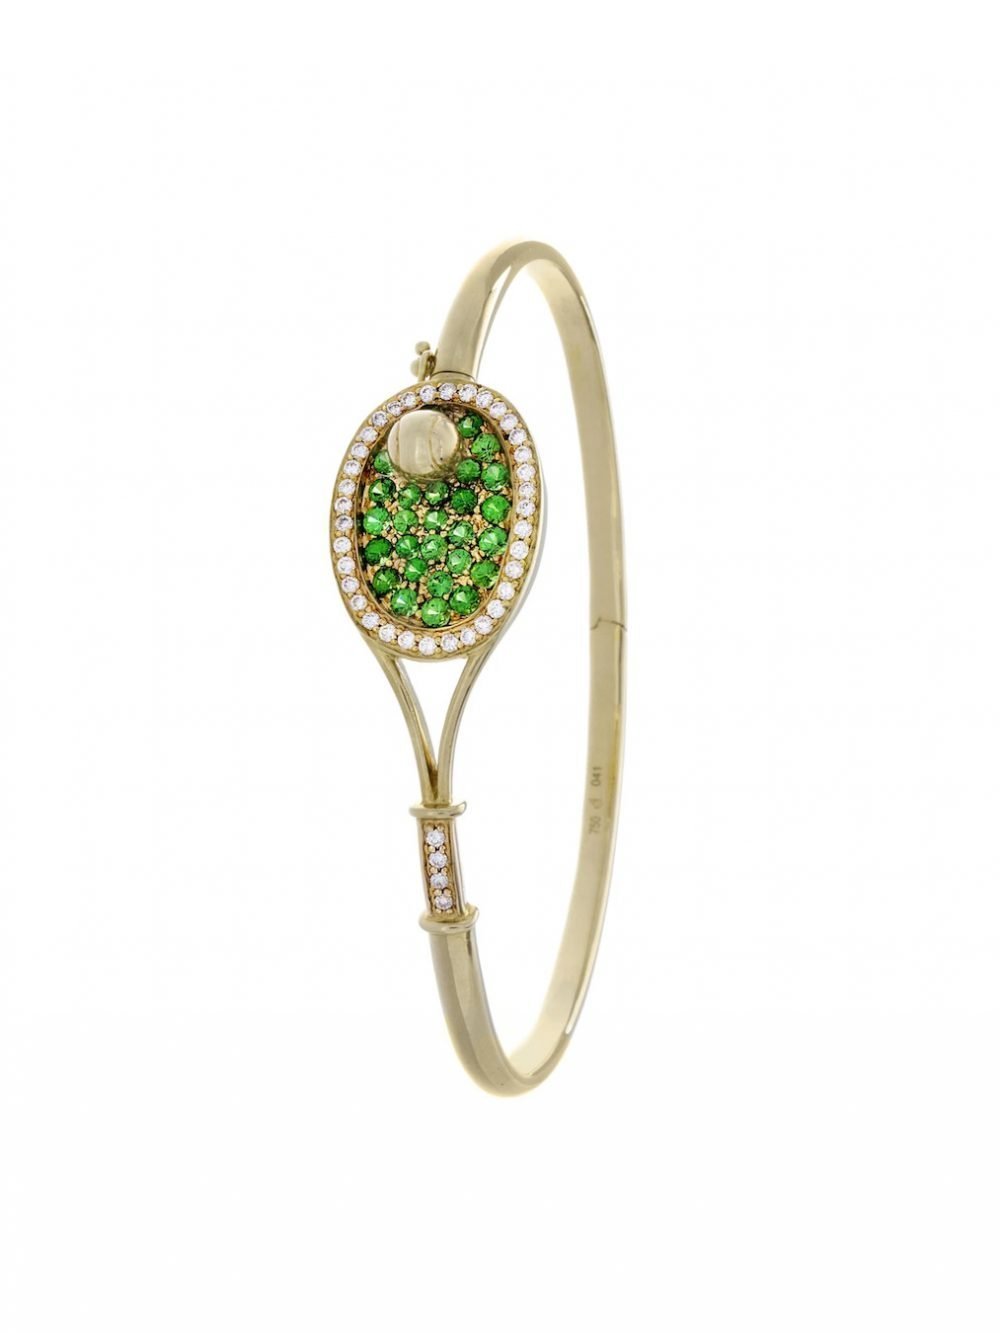 Tennis jewelry consisting of racket-shaped bracelet & tennis ball (18K solid yellow gold with 25 tsavorite gemstones and 40 diamonds)